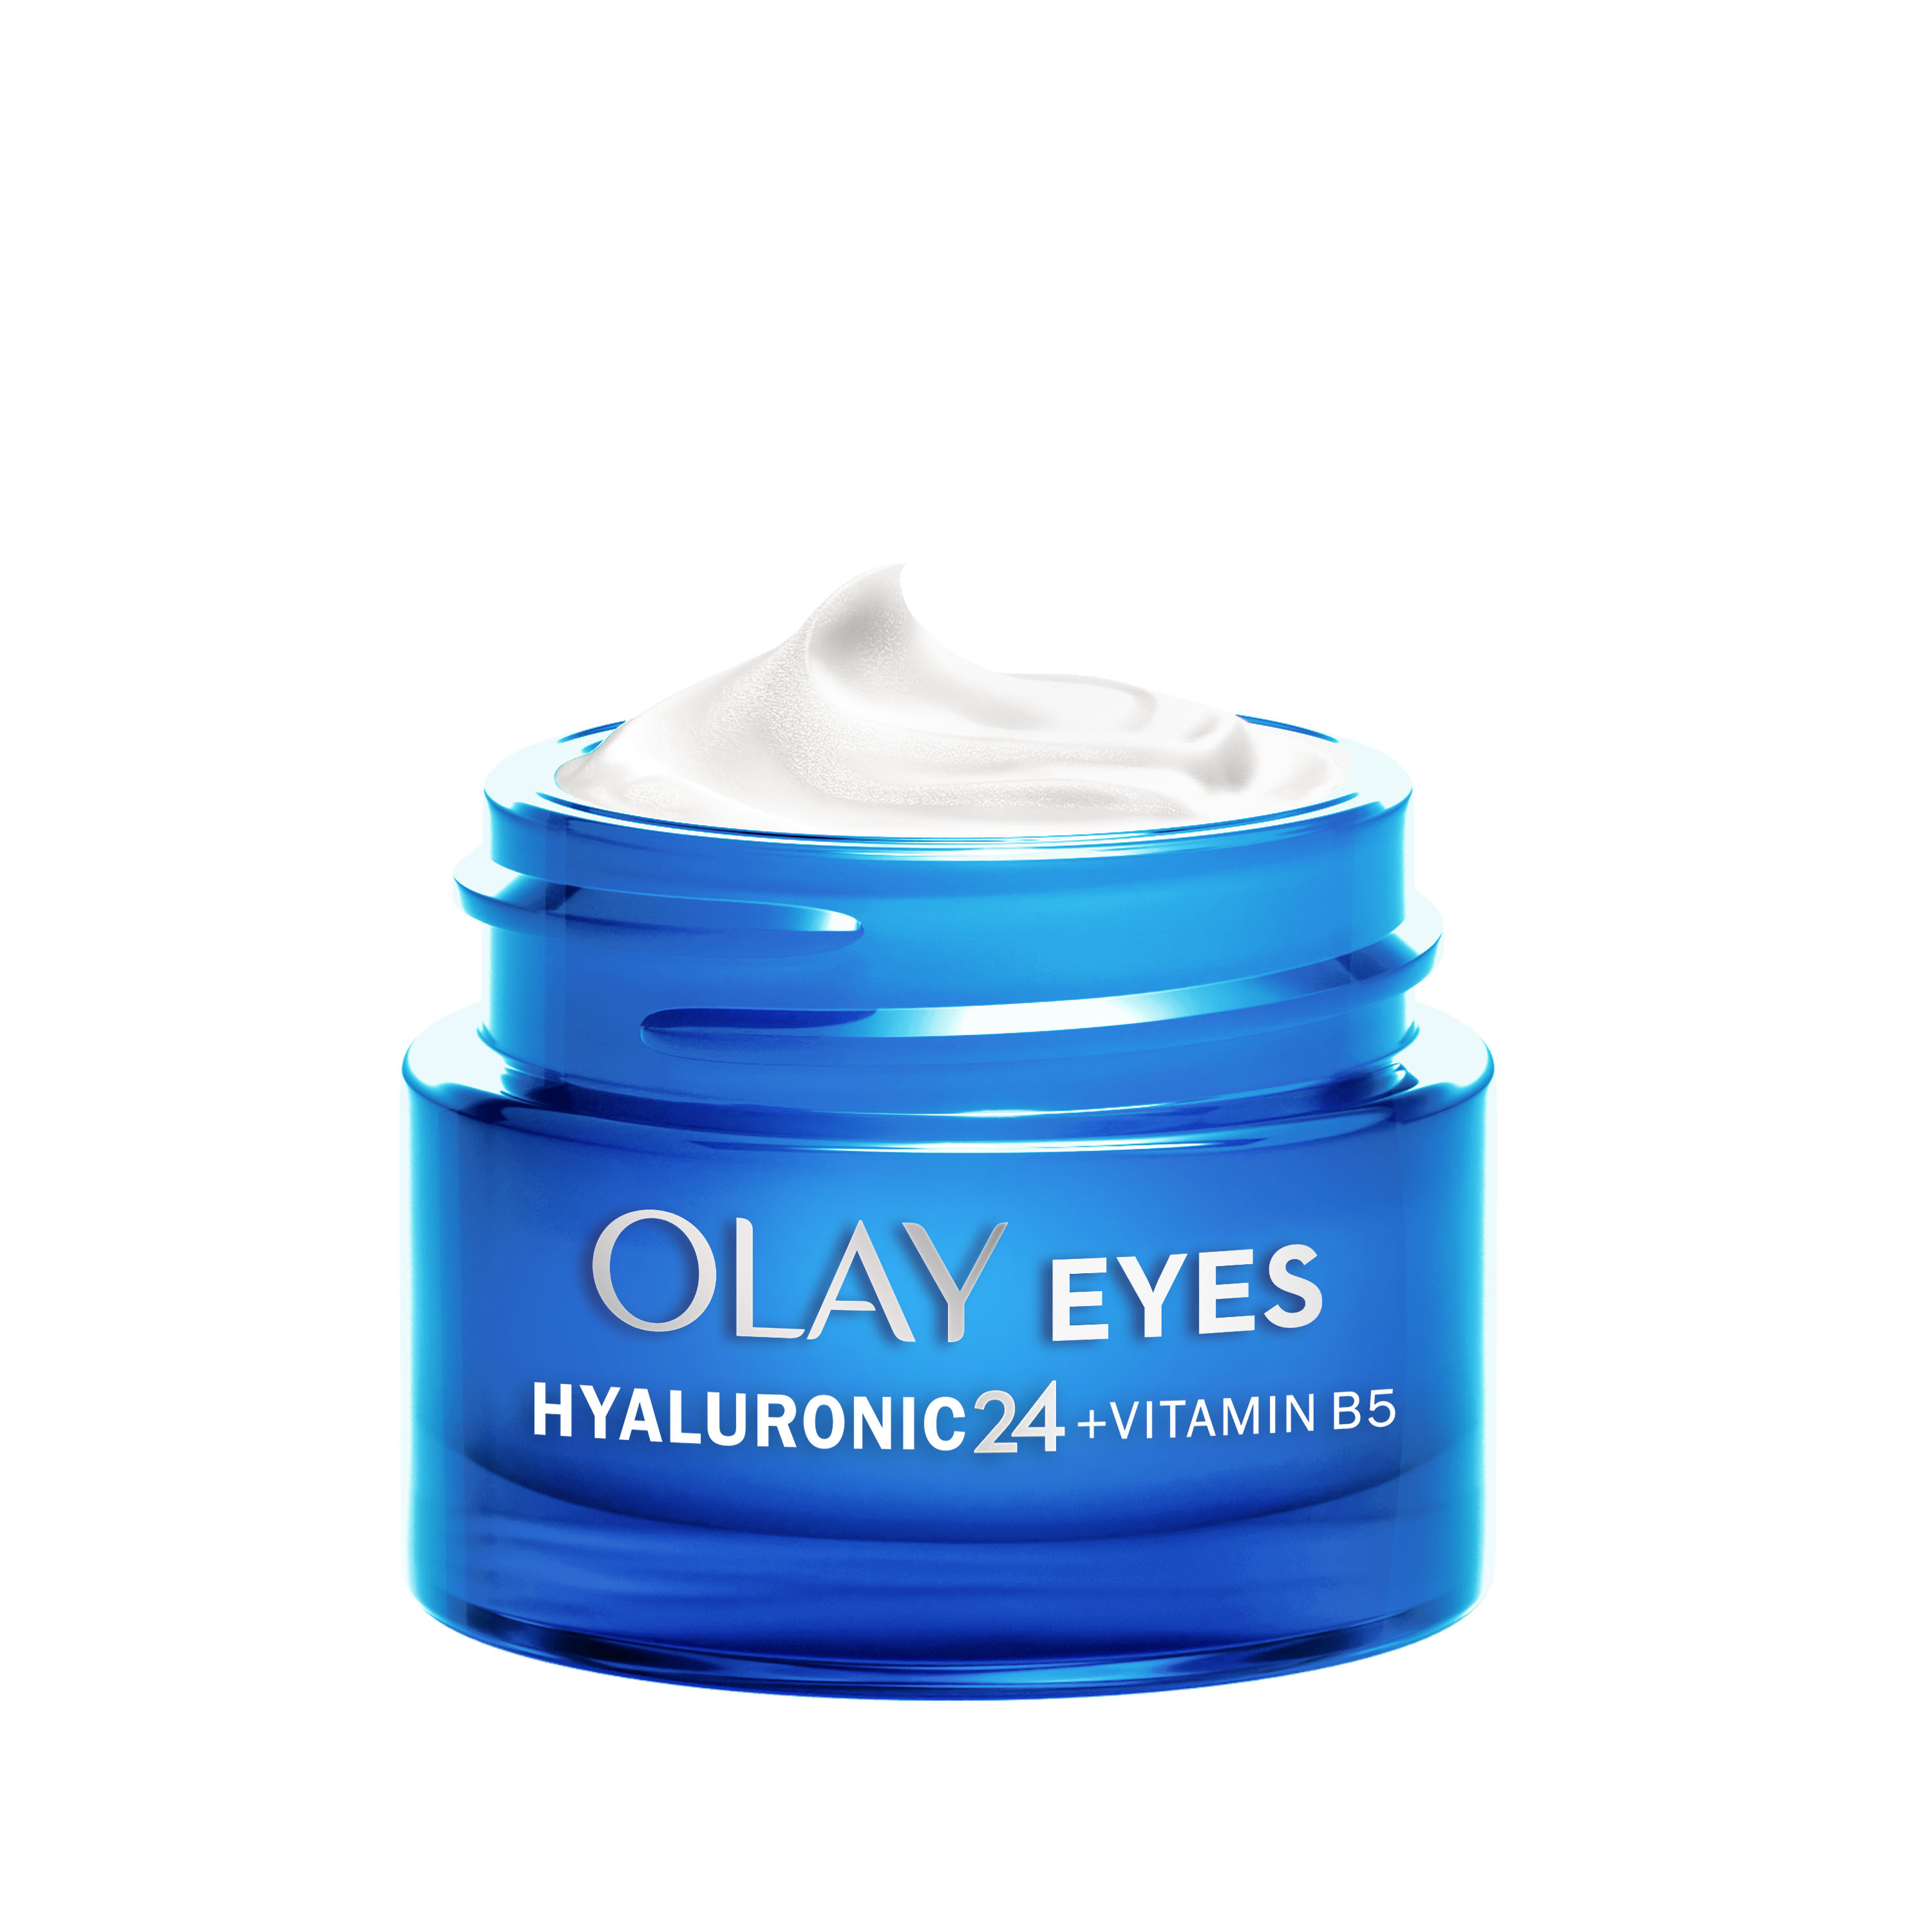 Productpot: OLAY EYES - HYALURONIC24 + VITAMIN B3  - oog creme 